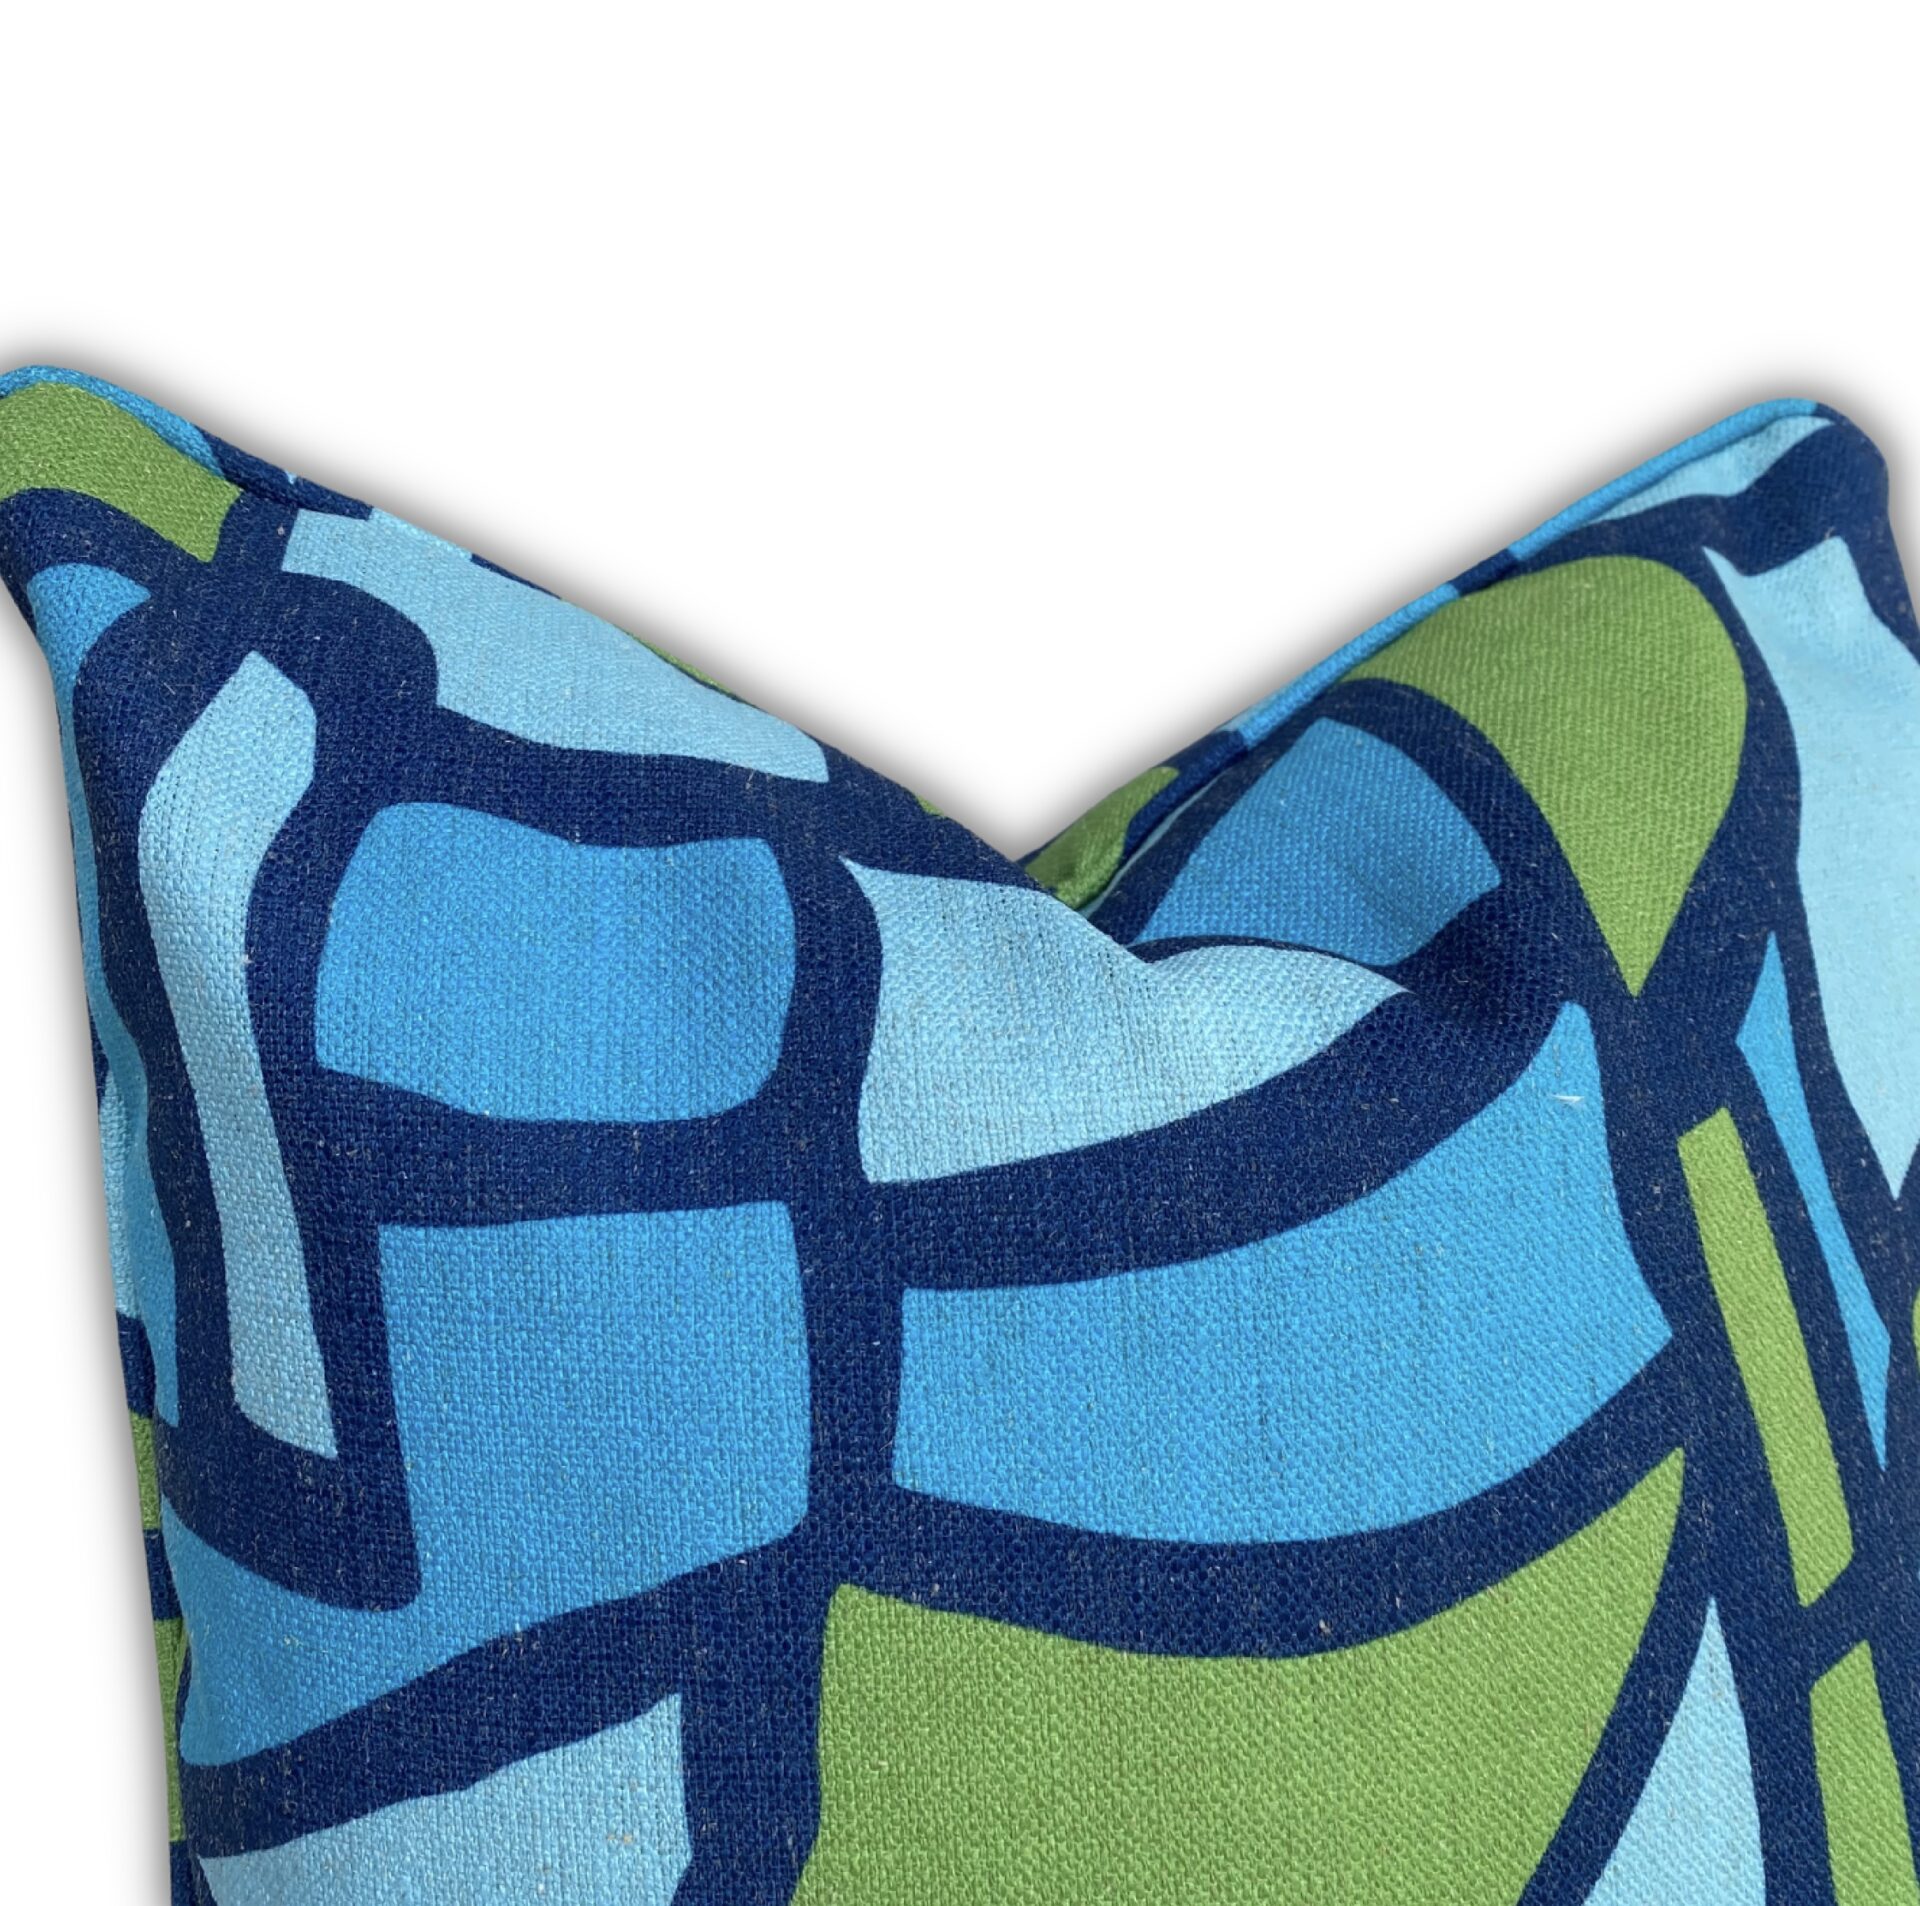 Stained Glass Florence Broadhurst Printed Cushion.